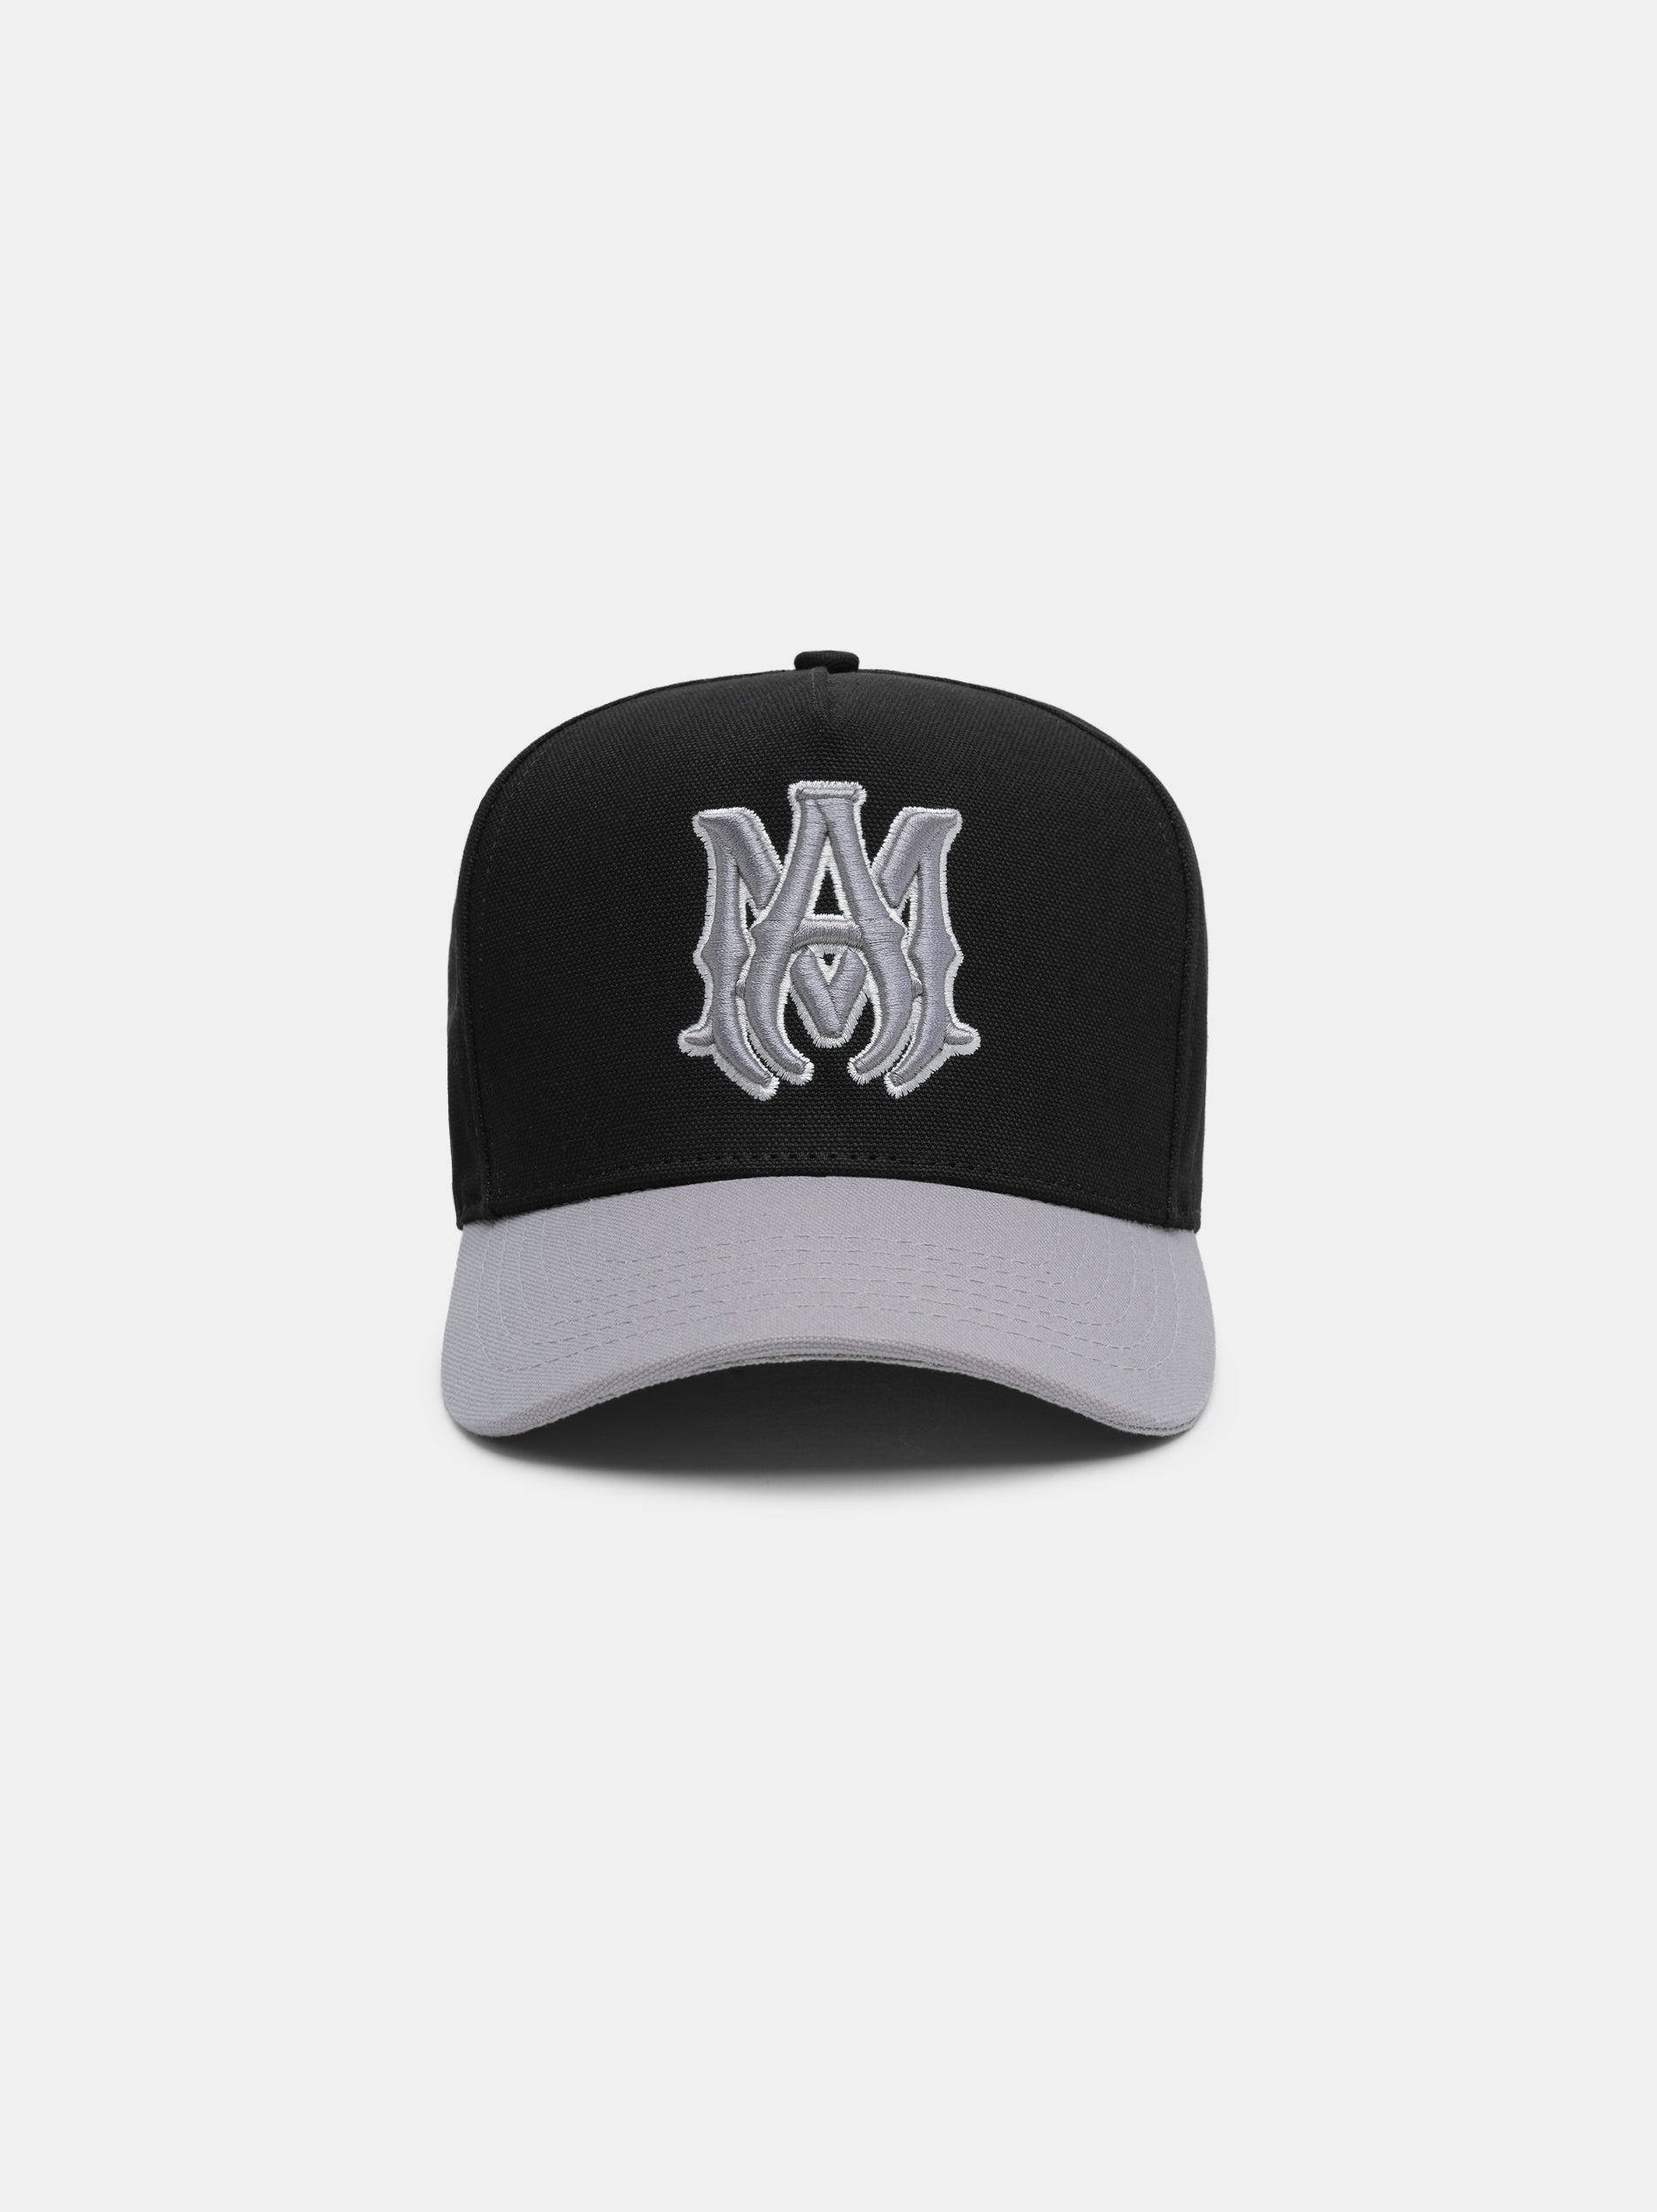 Product MA CANVAS HAT - Black Grey featured image